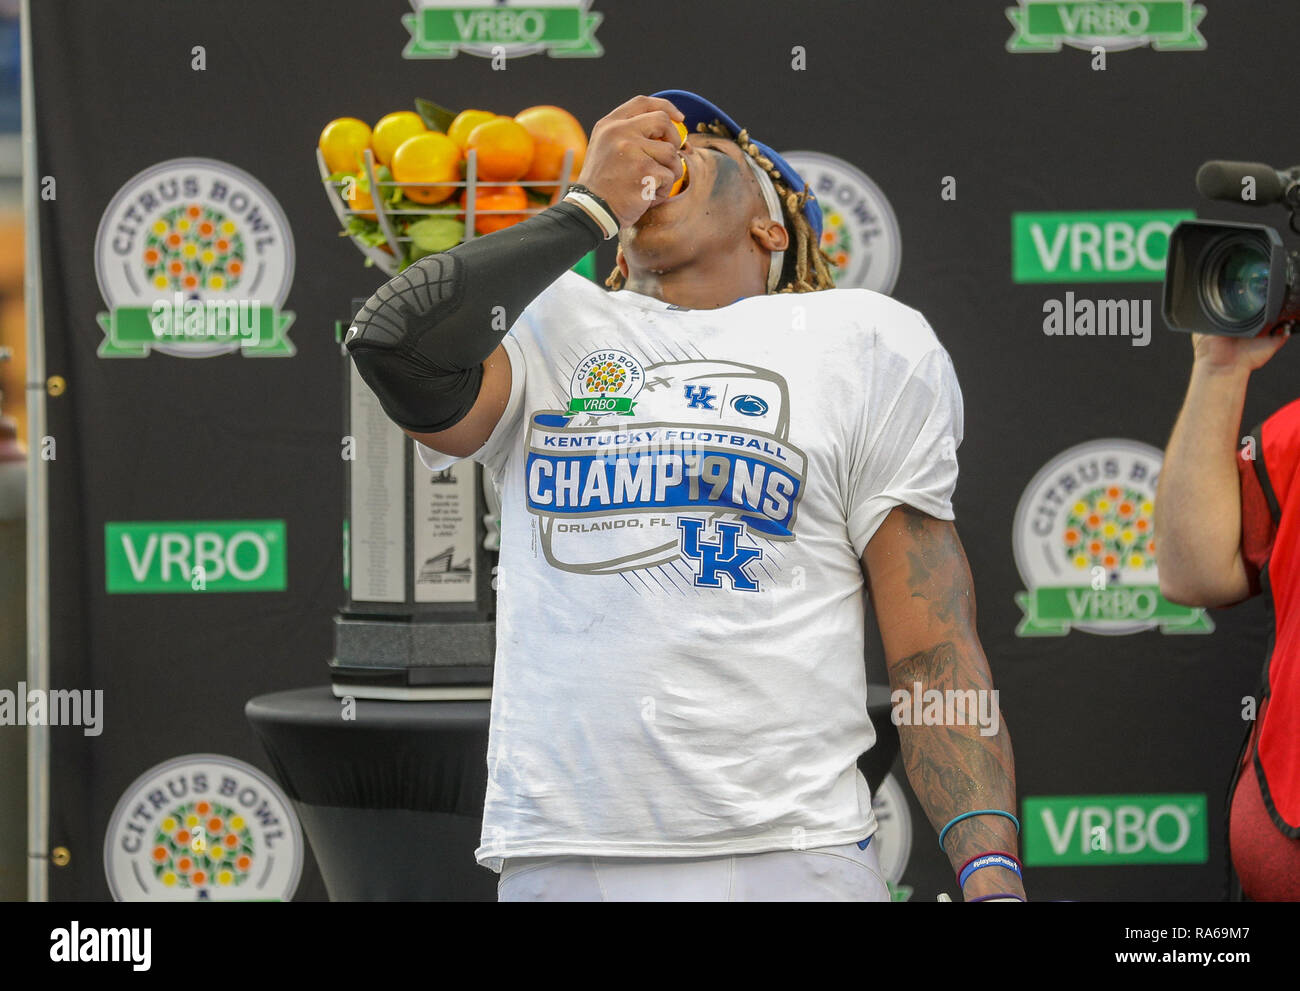 Orlando, Florida, USA. 1st Jan, 2019. Citrus Bowl MVP Benny Snell Jr #26 of Kentucky takes a bite out of an orange following the Citrus Bowl football game between the Kentucky Wildcats and the Penn State Nittany Lions at Camping World Stadium in Orlando, Florida. Kyle Okita/CSM/Alamy Live News Stock Photo